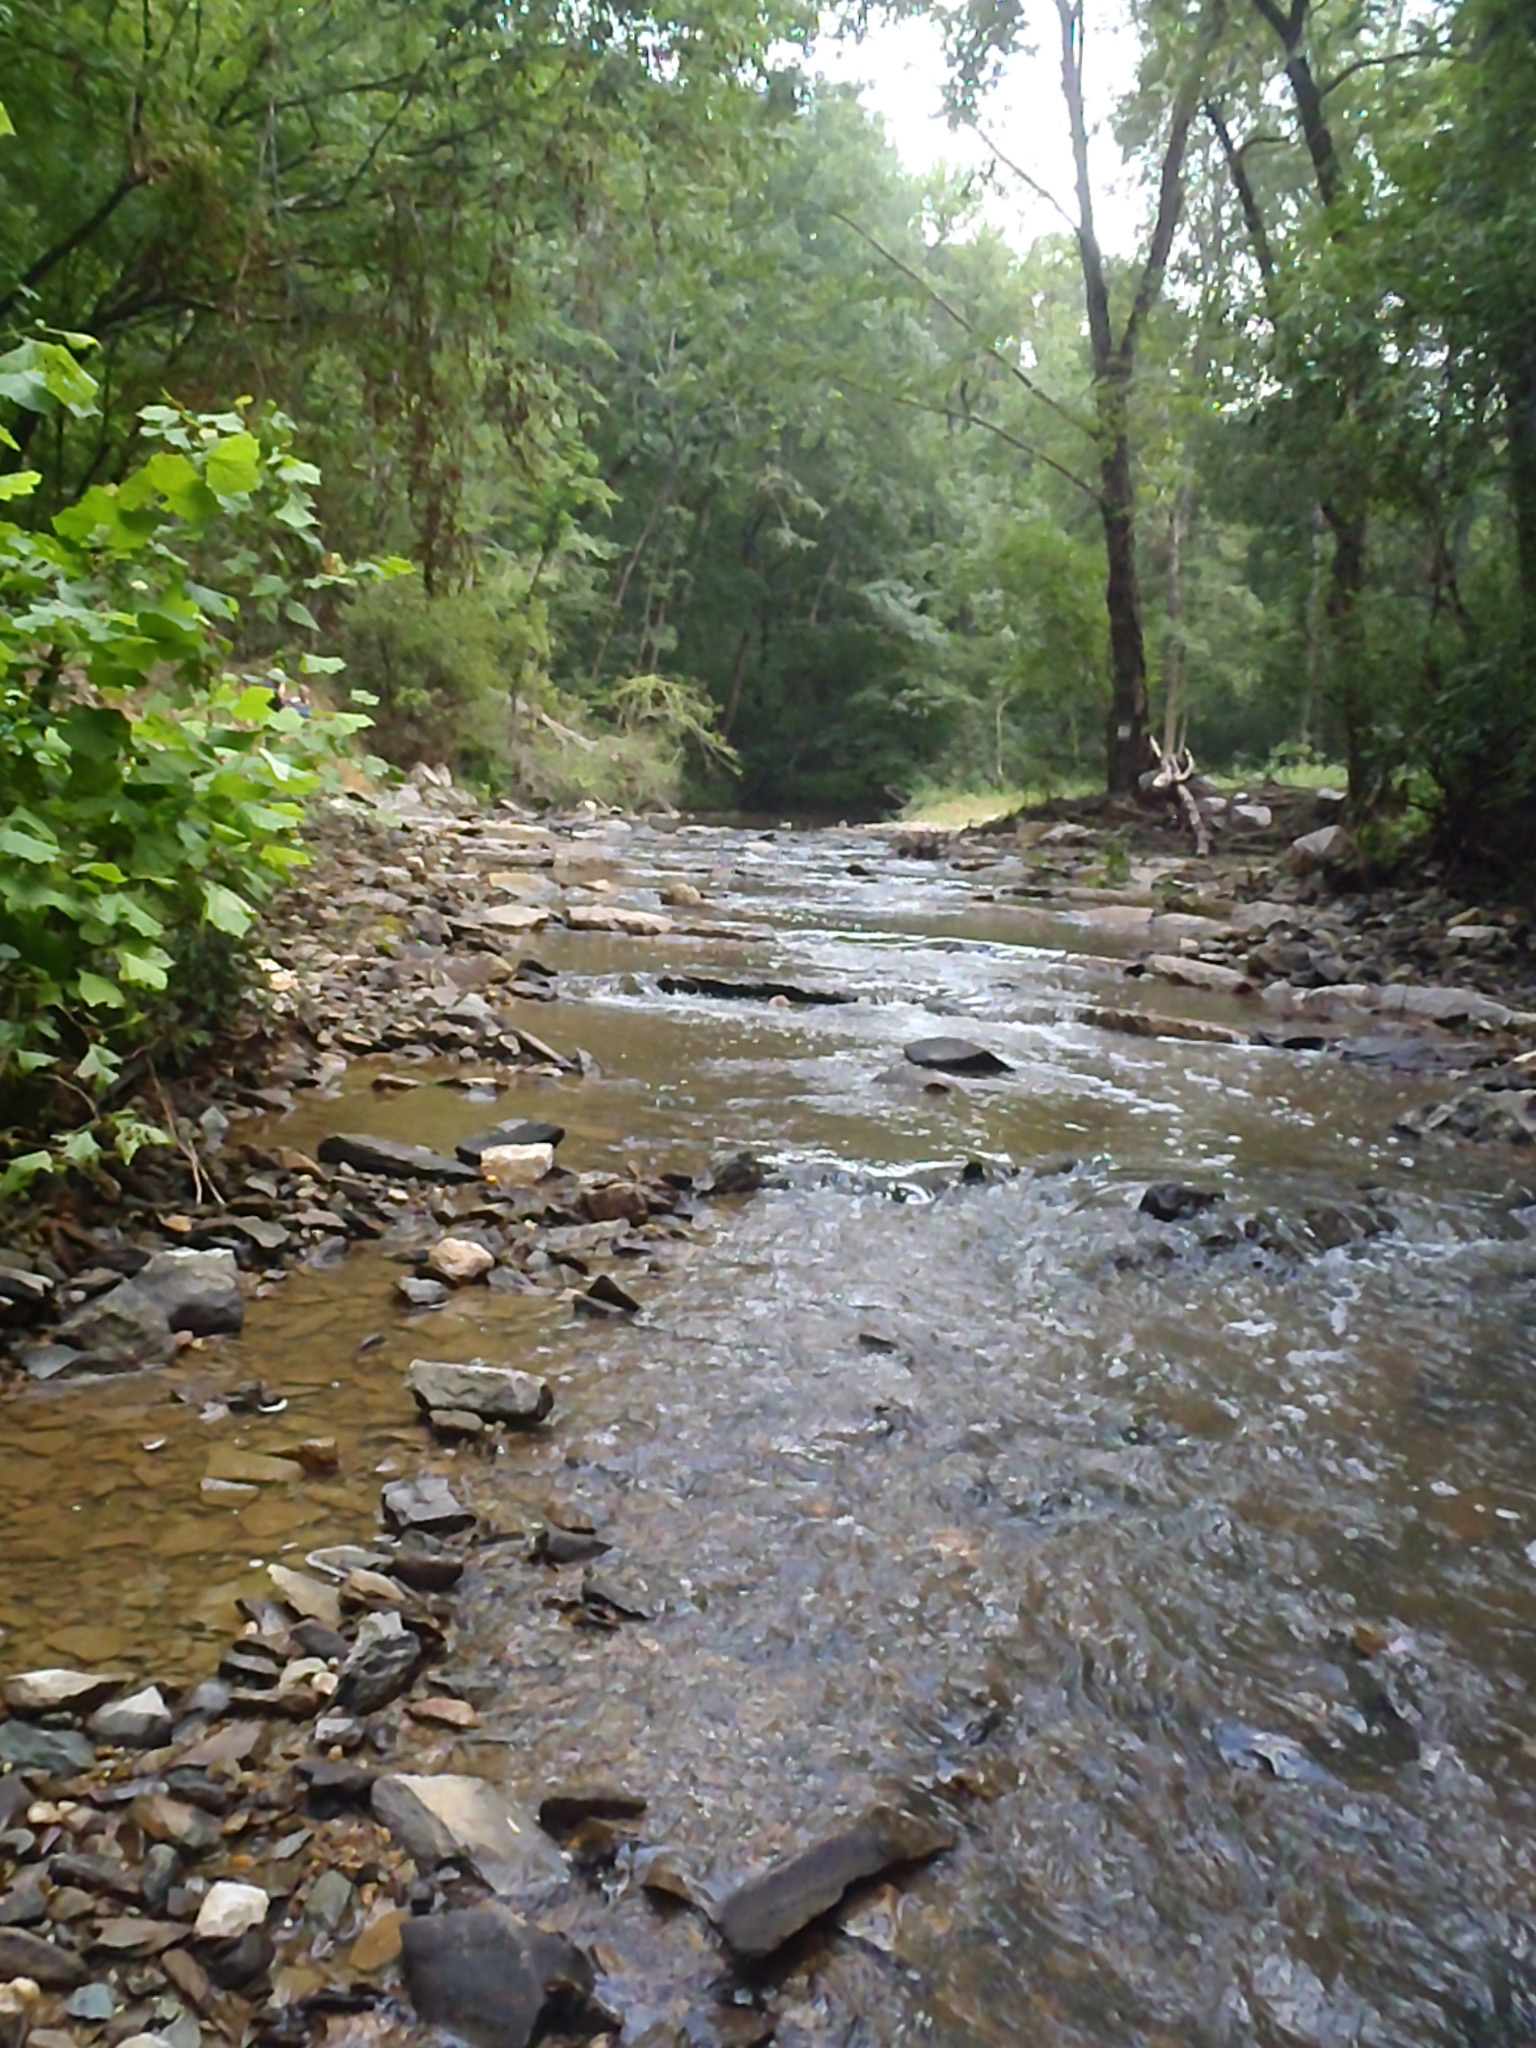 A view downstream of Densons Creek in Troy, NC.